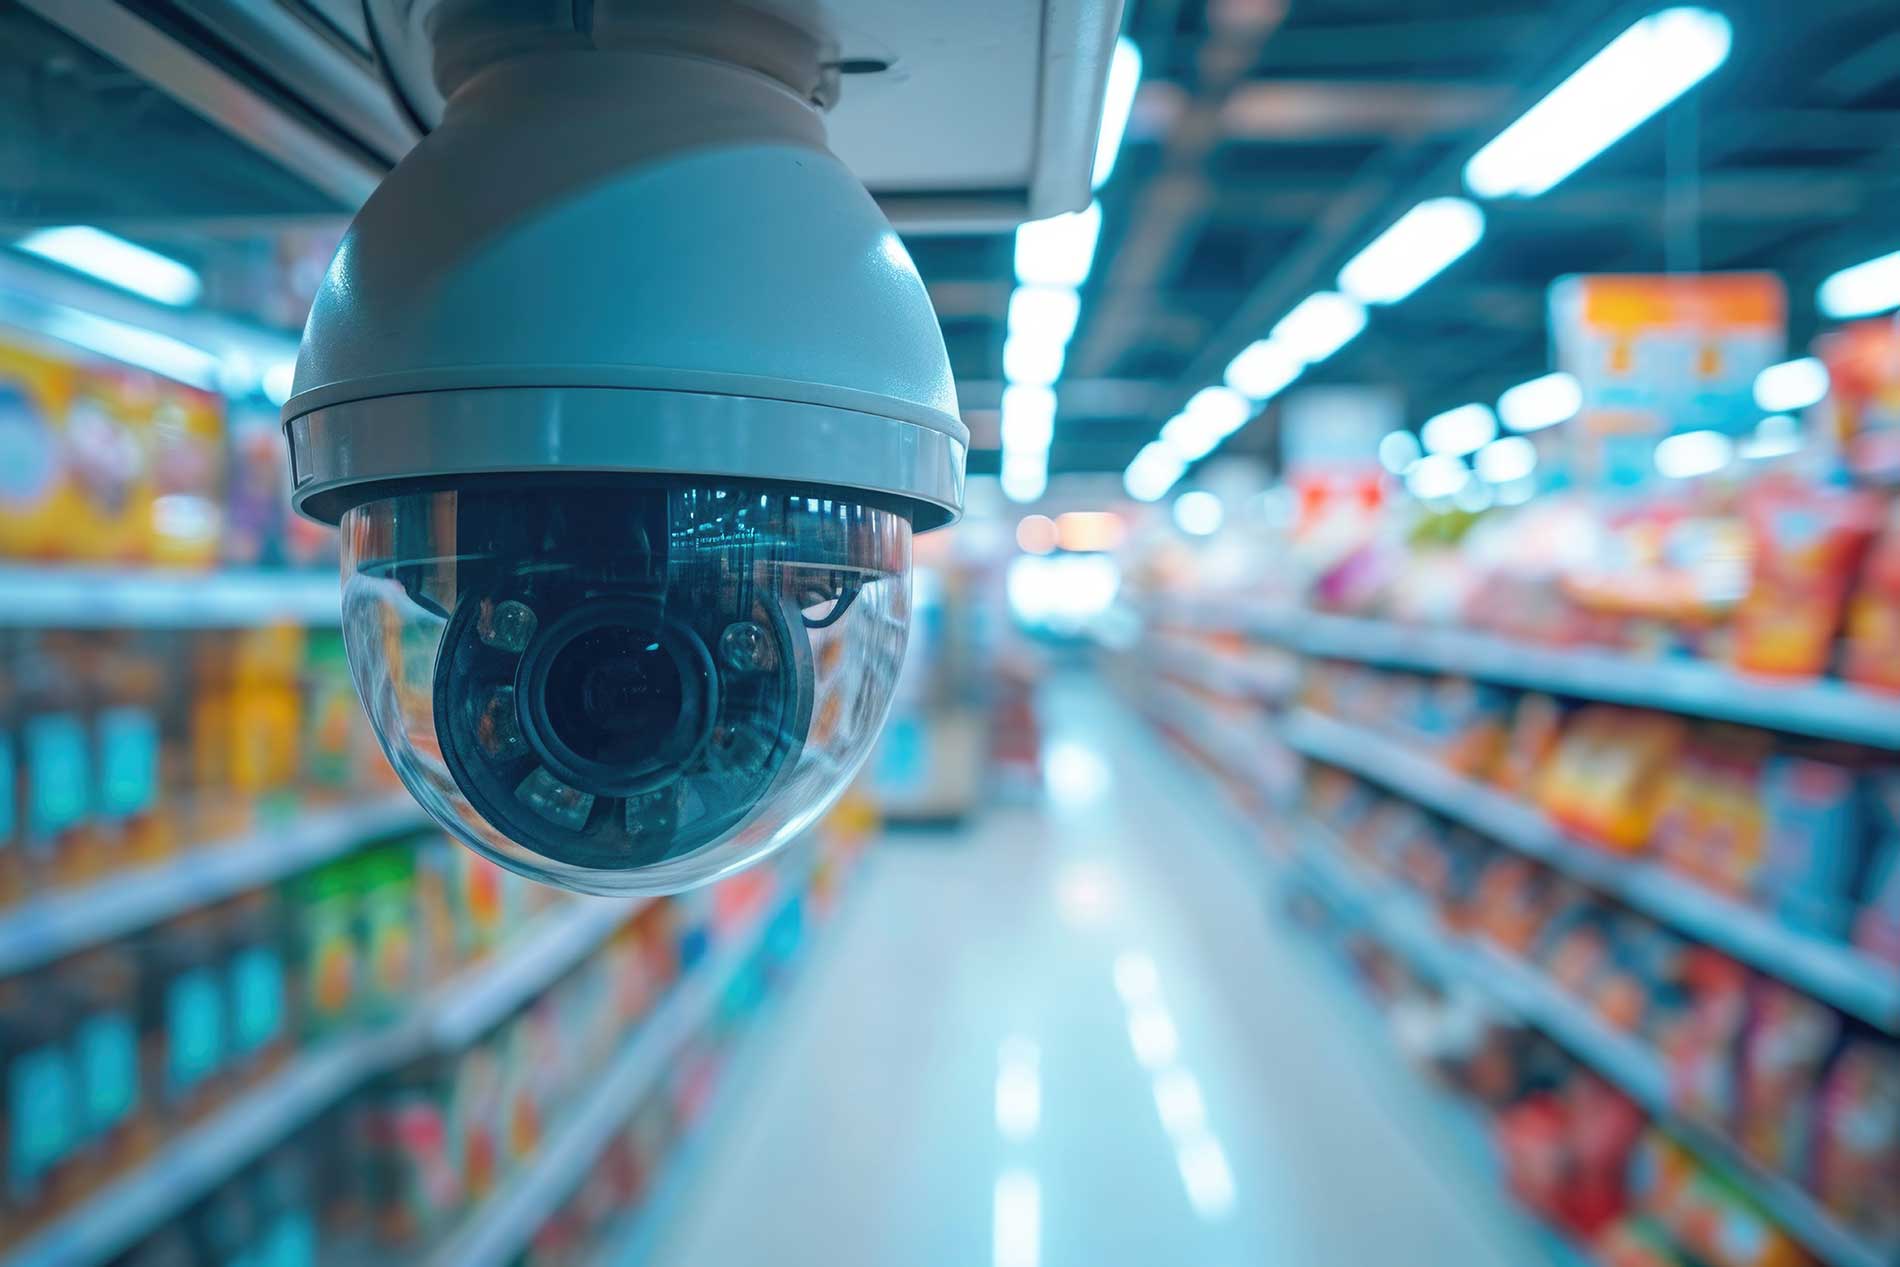 camera systems in a store overlooking customers buying products